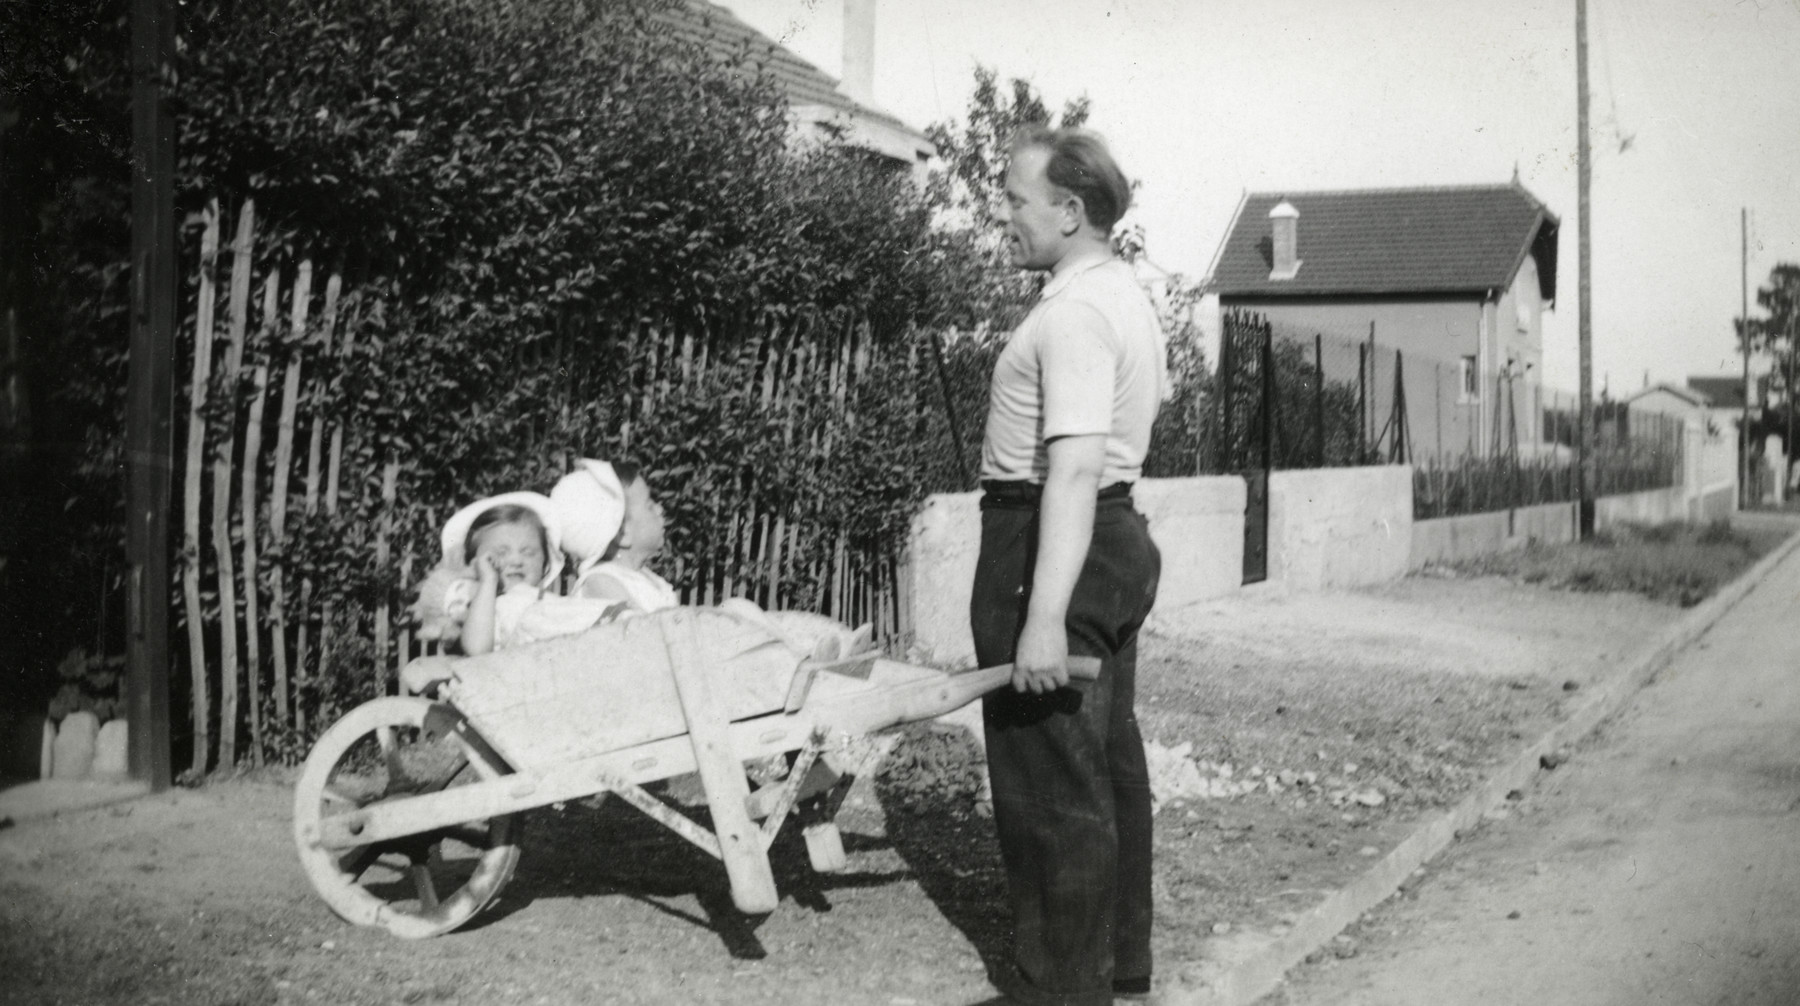 A Jewish father pushes his two young children in a wheelbarrow, near their home in Gagny, a suburb of Paris.

Pictured are Hersh Jakubovitch and his children Fernande and Albert.